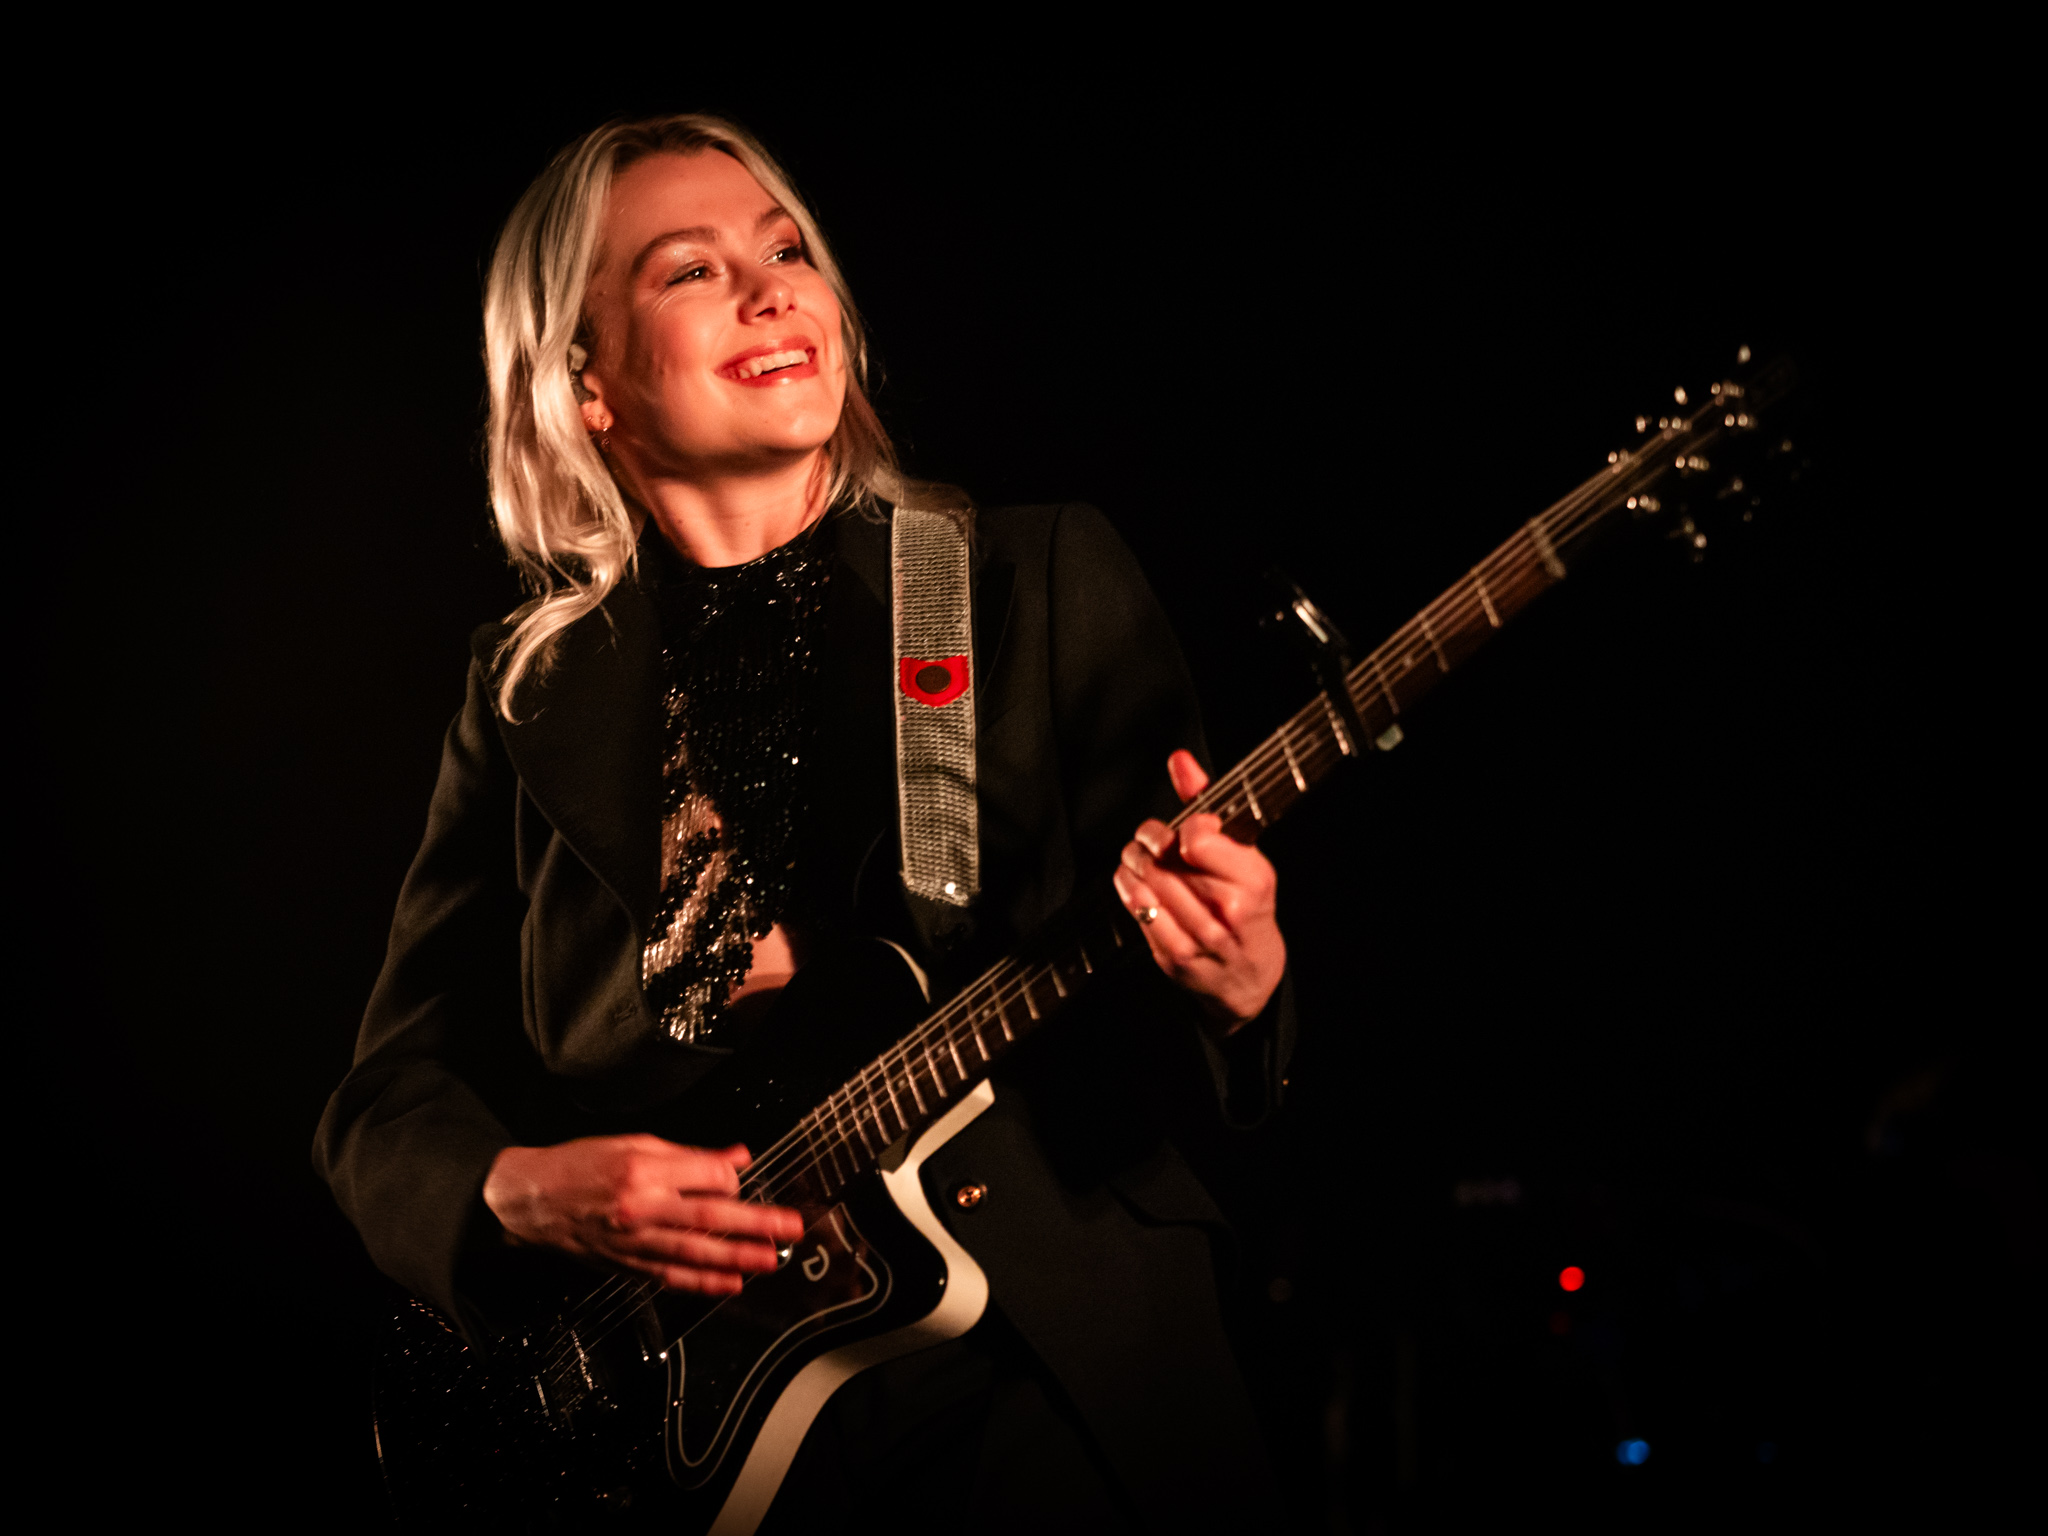 Phoebe Bridgers by Bullet-ray Photography